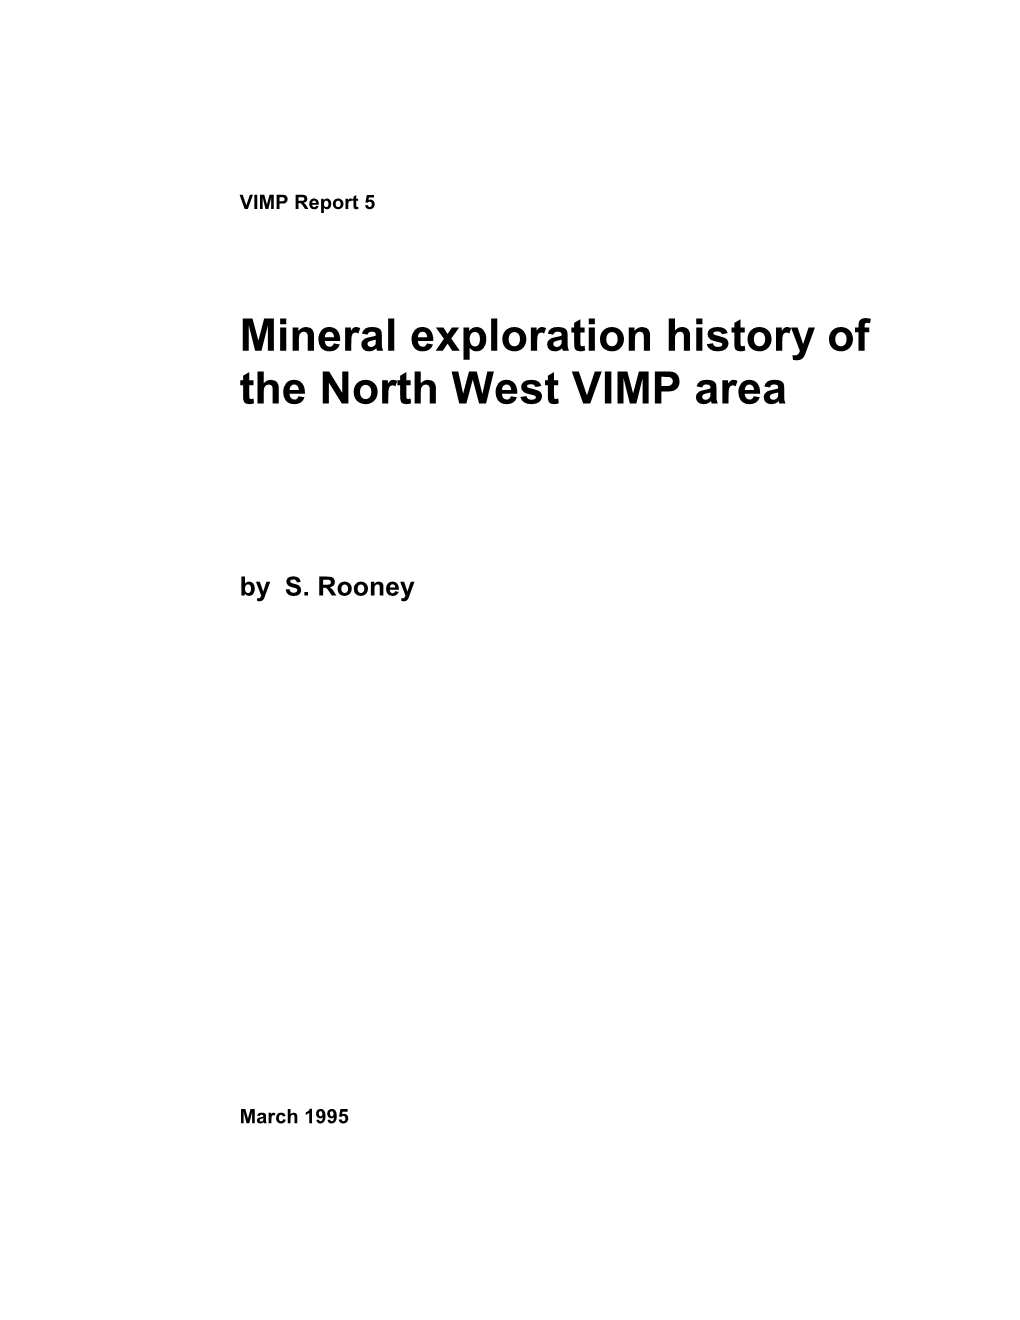 Mineral Exploration History of the North West VIMP Area